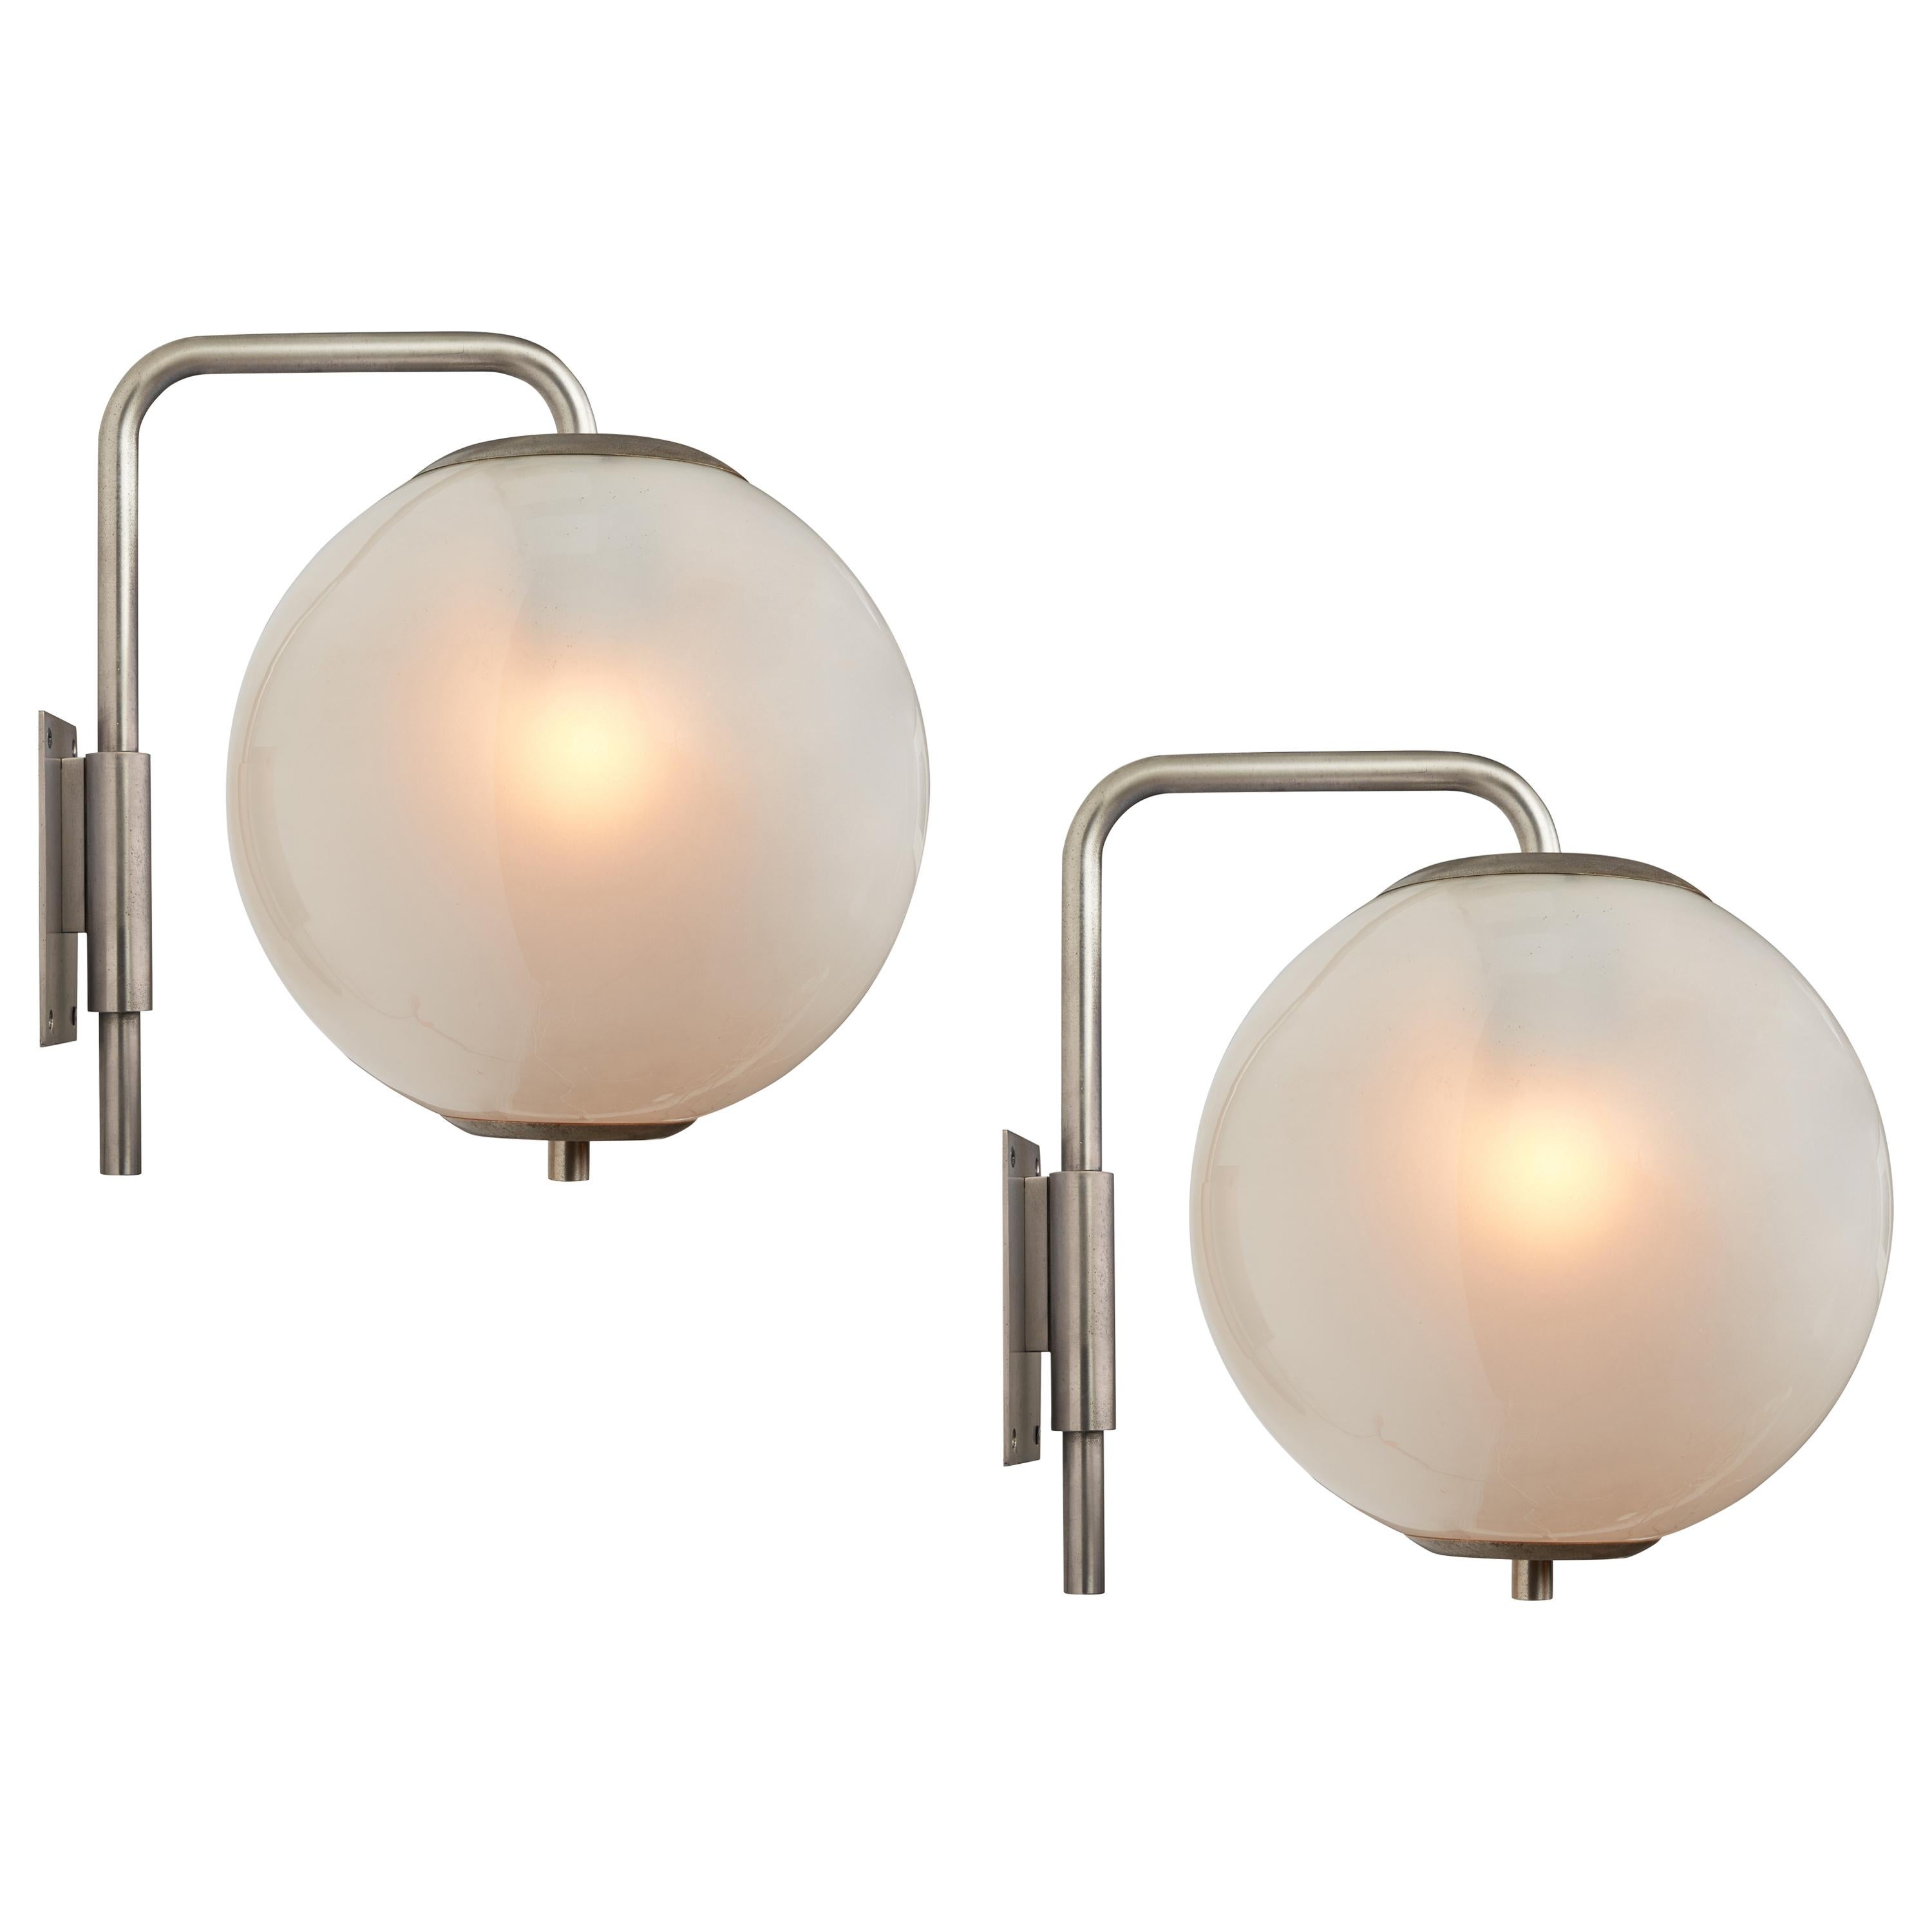 Large 1960s Italian Glass Globe Sconces in the Manner of Azucena